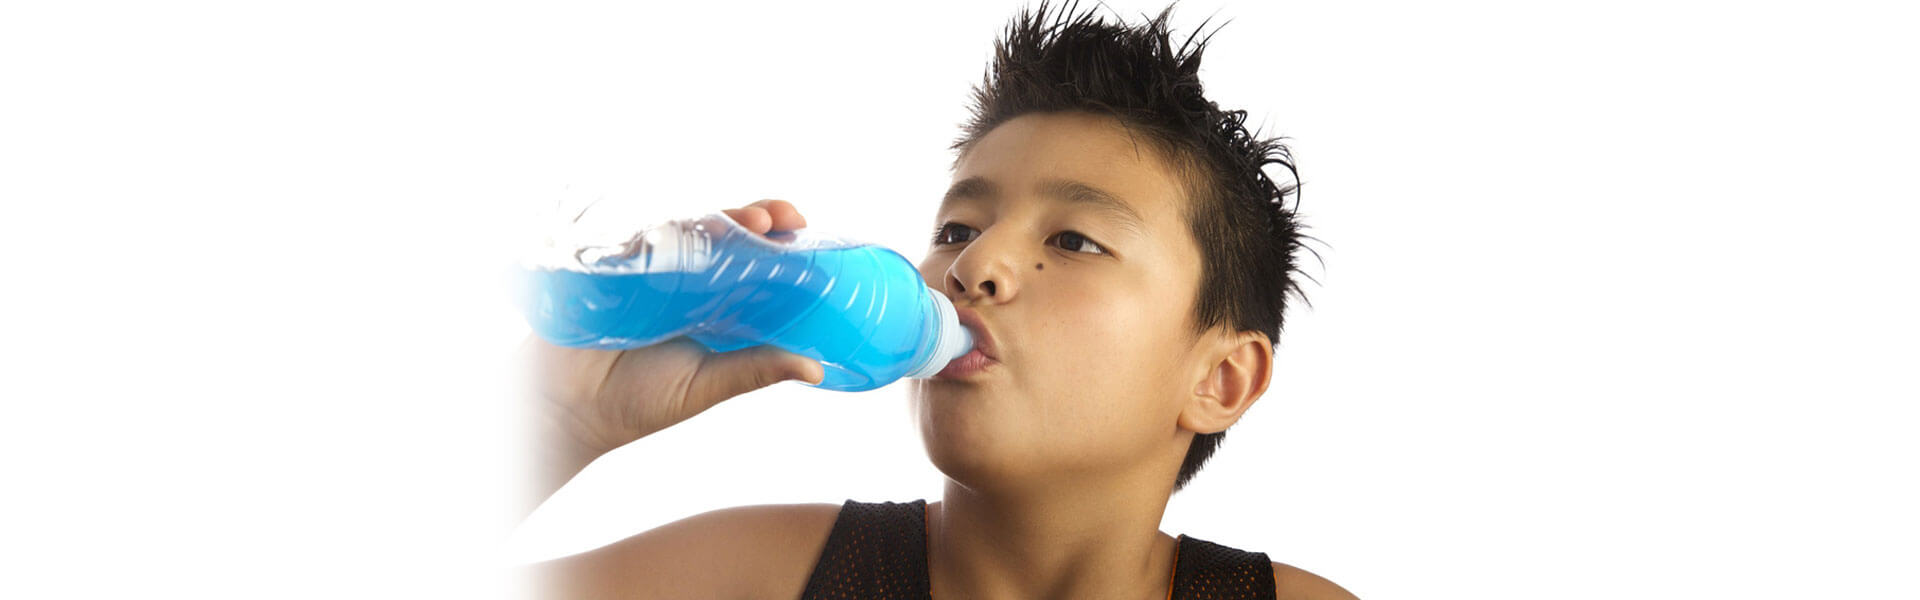 The Dangers of Sports Drinks